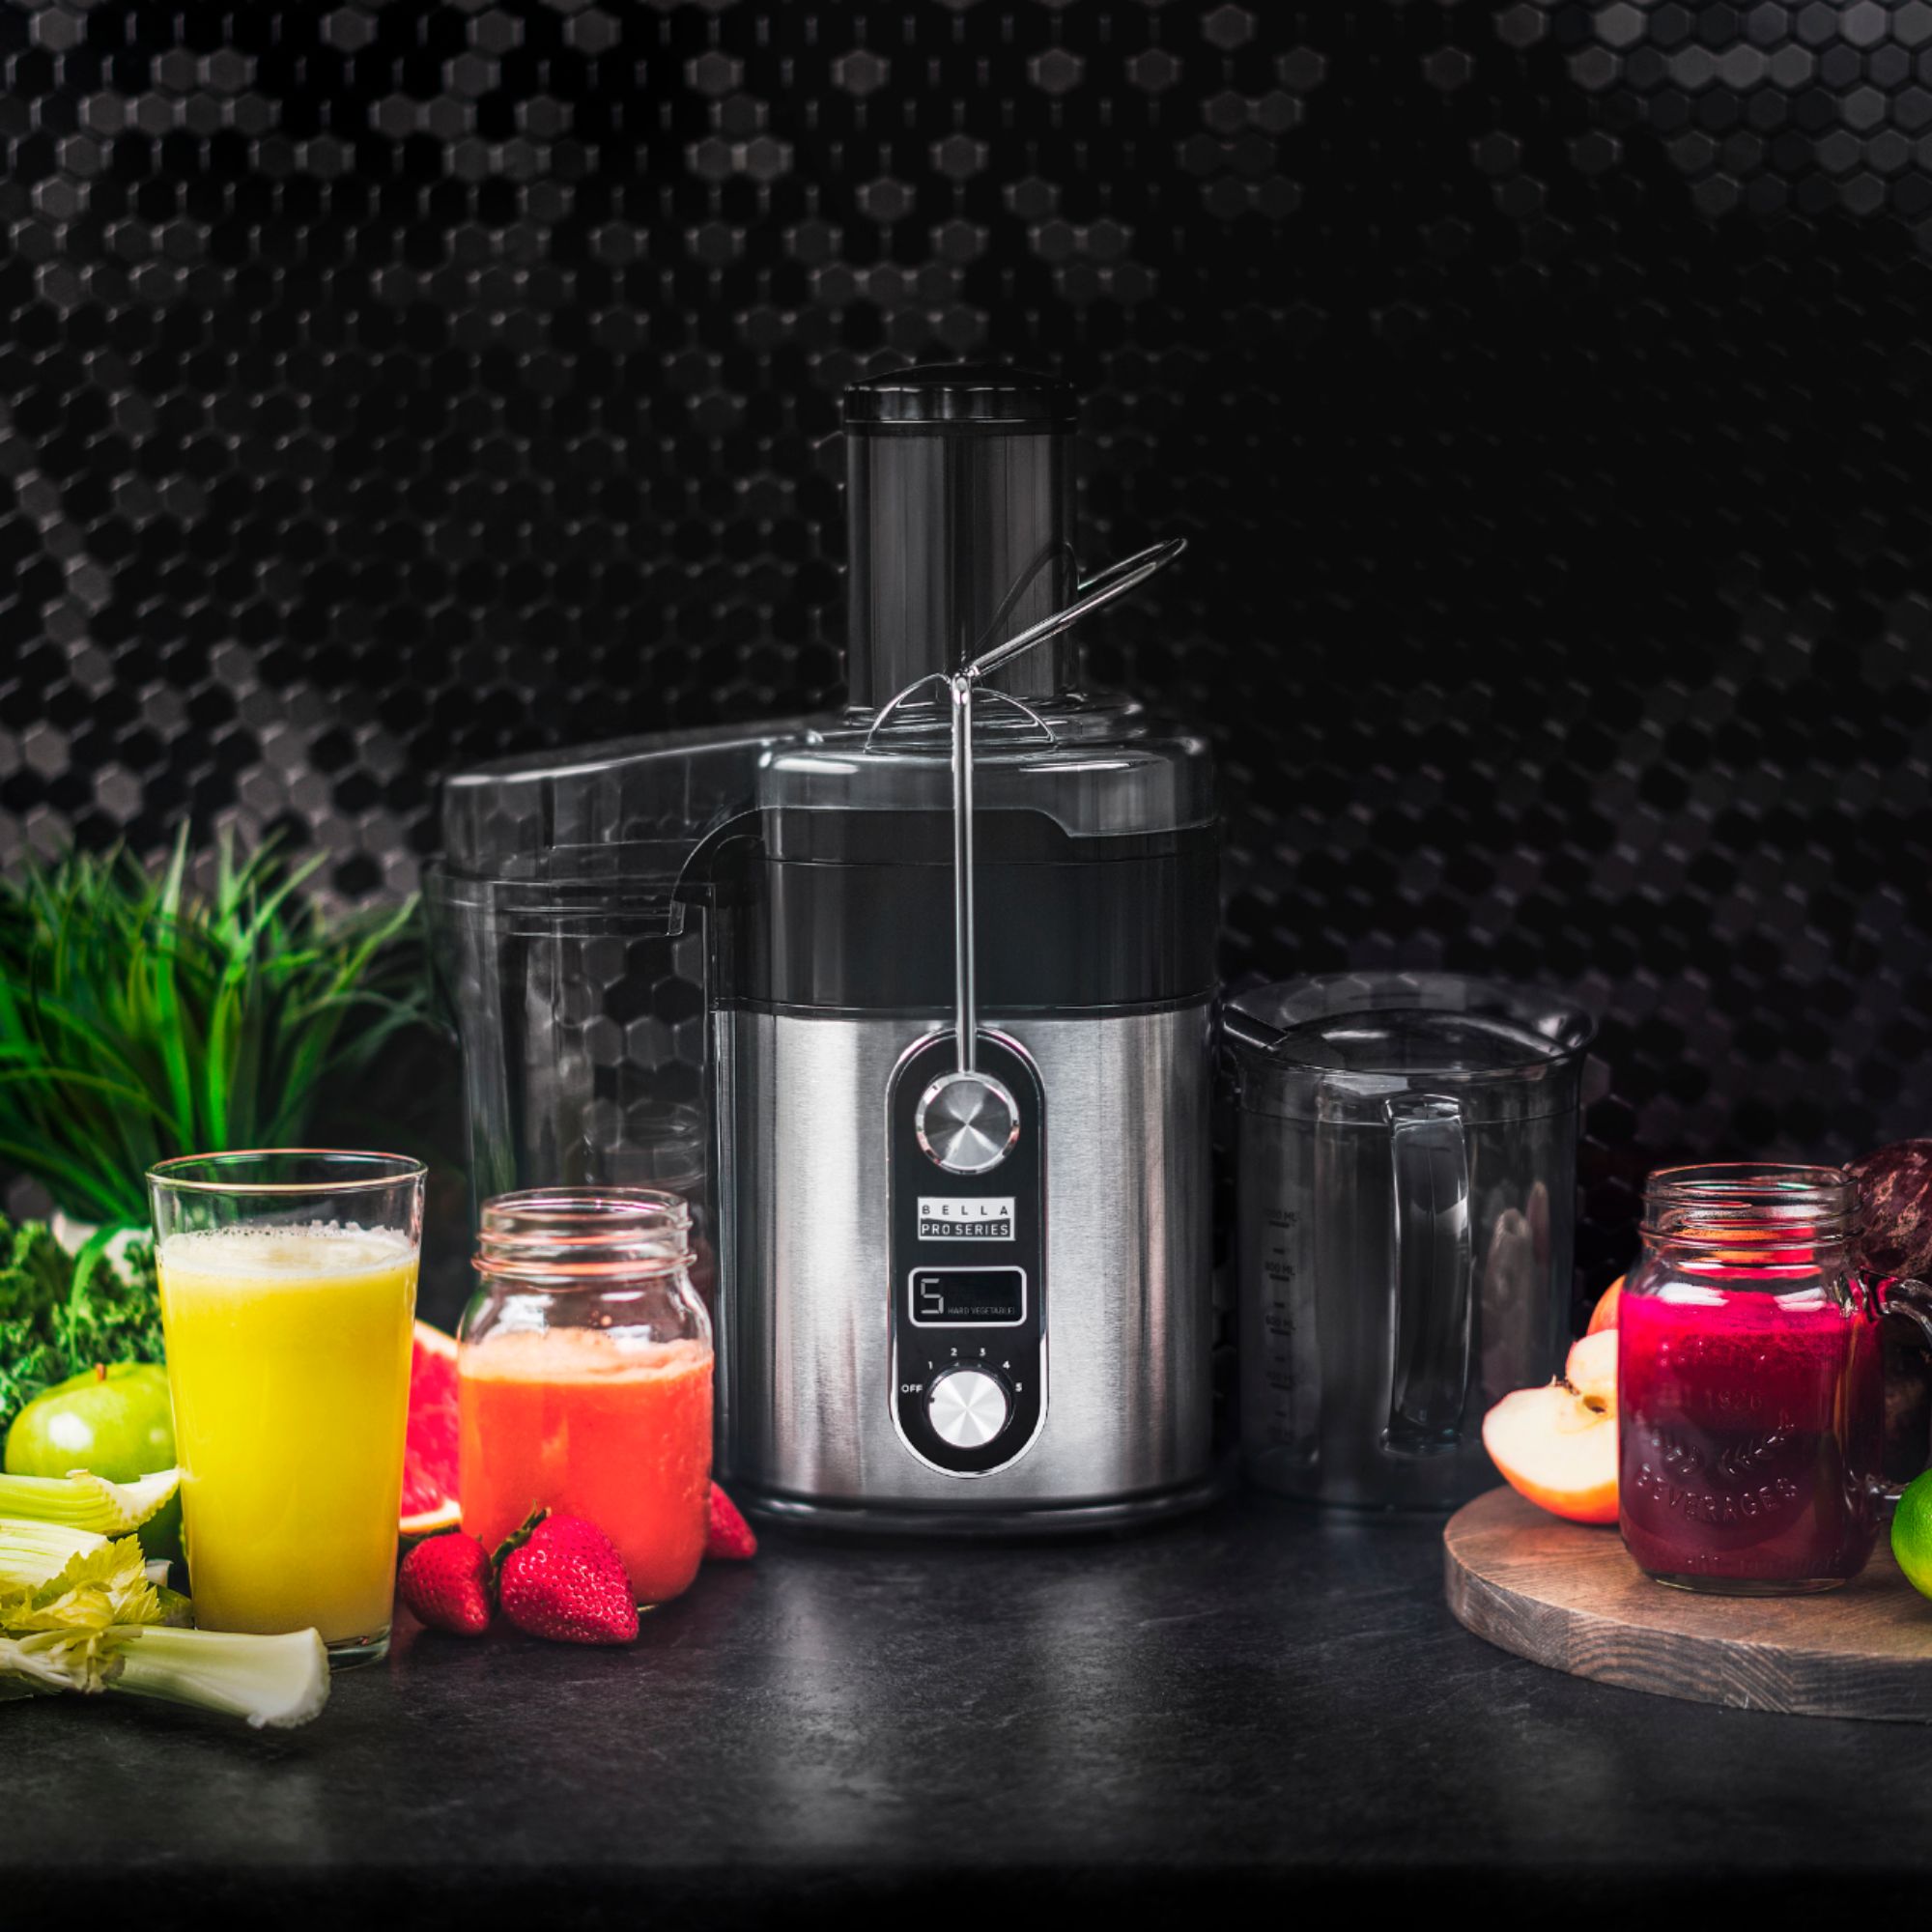 Bella Pro Series Centrifugal Juice Extractor Black/Stainless Steel Bella - Pro Series Centrifugal Juice Extractor - Black/stainless Steel